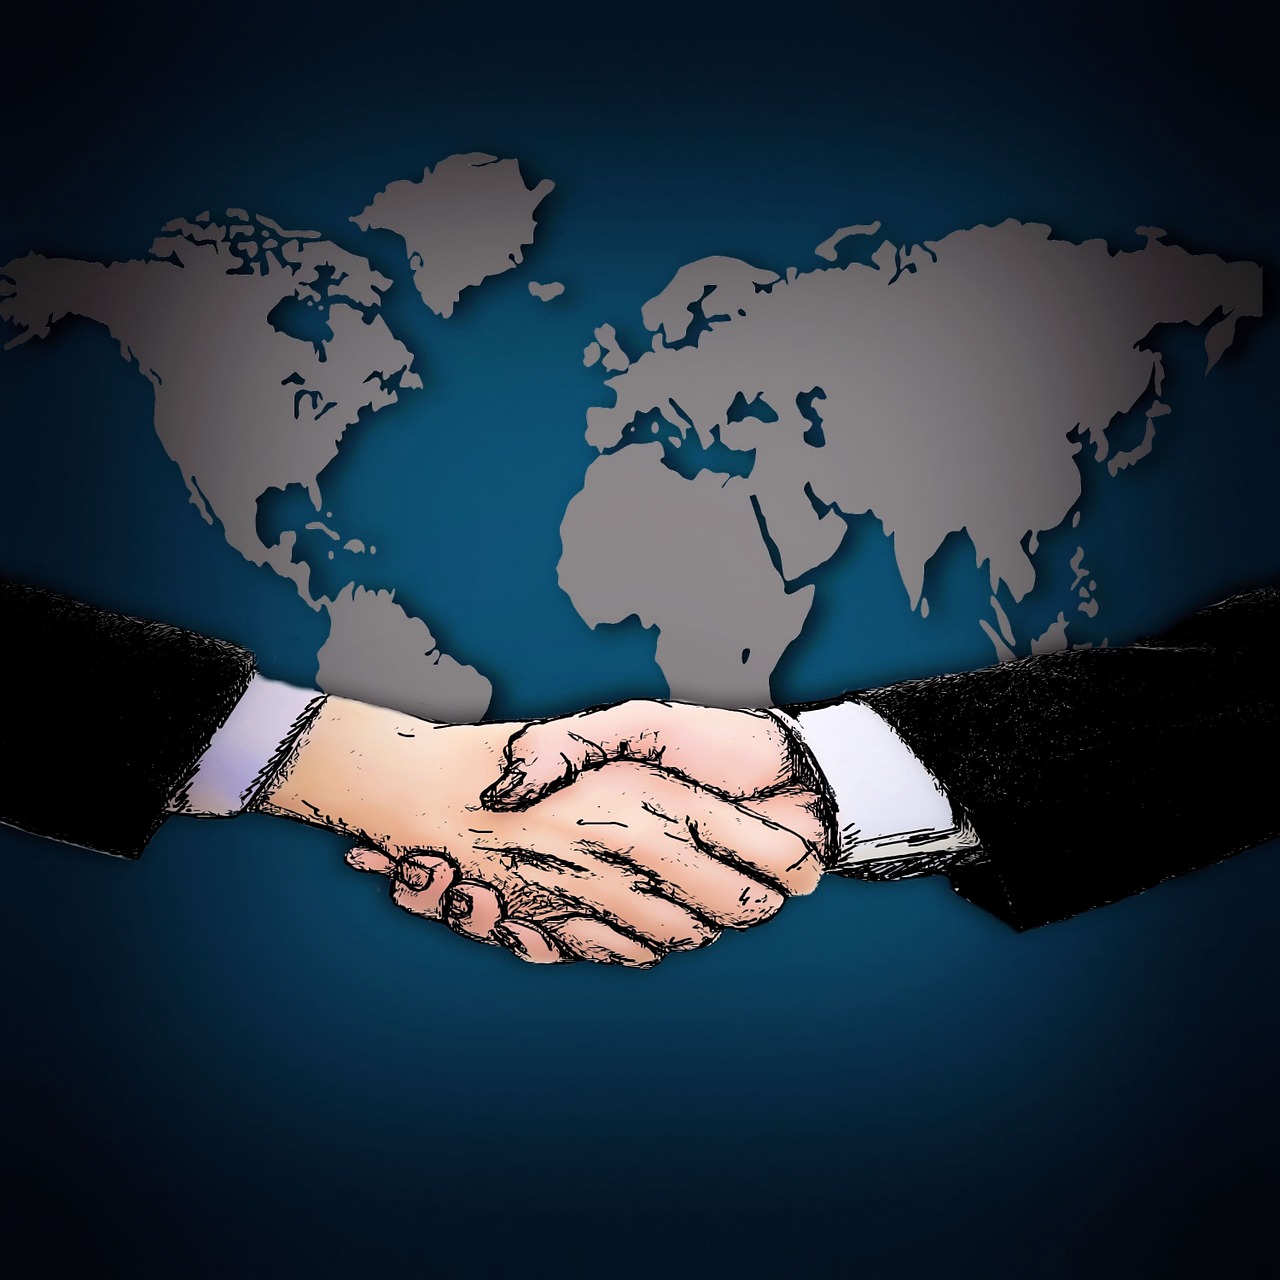 shaking hands map of the world contract free photo